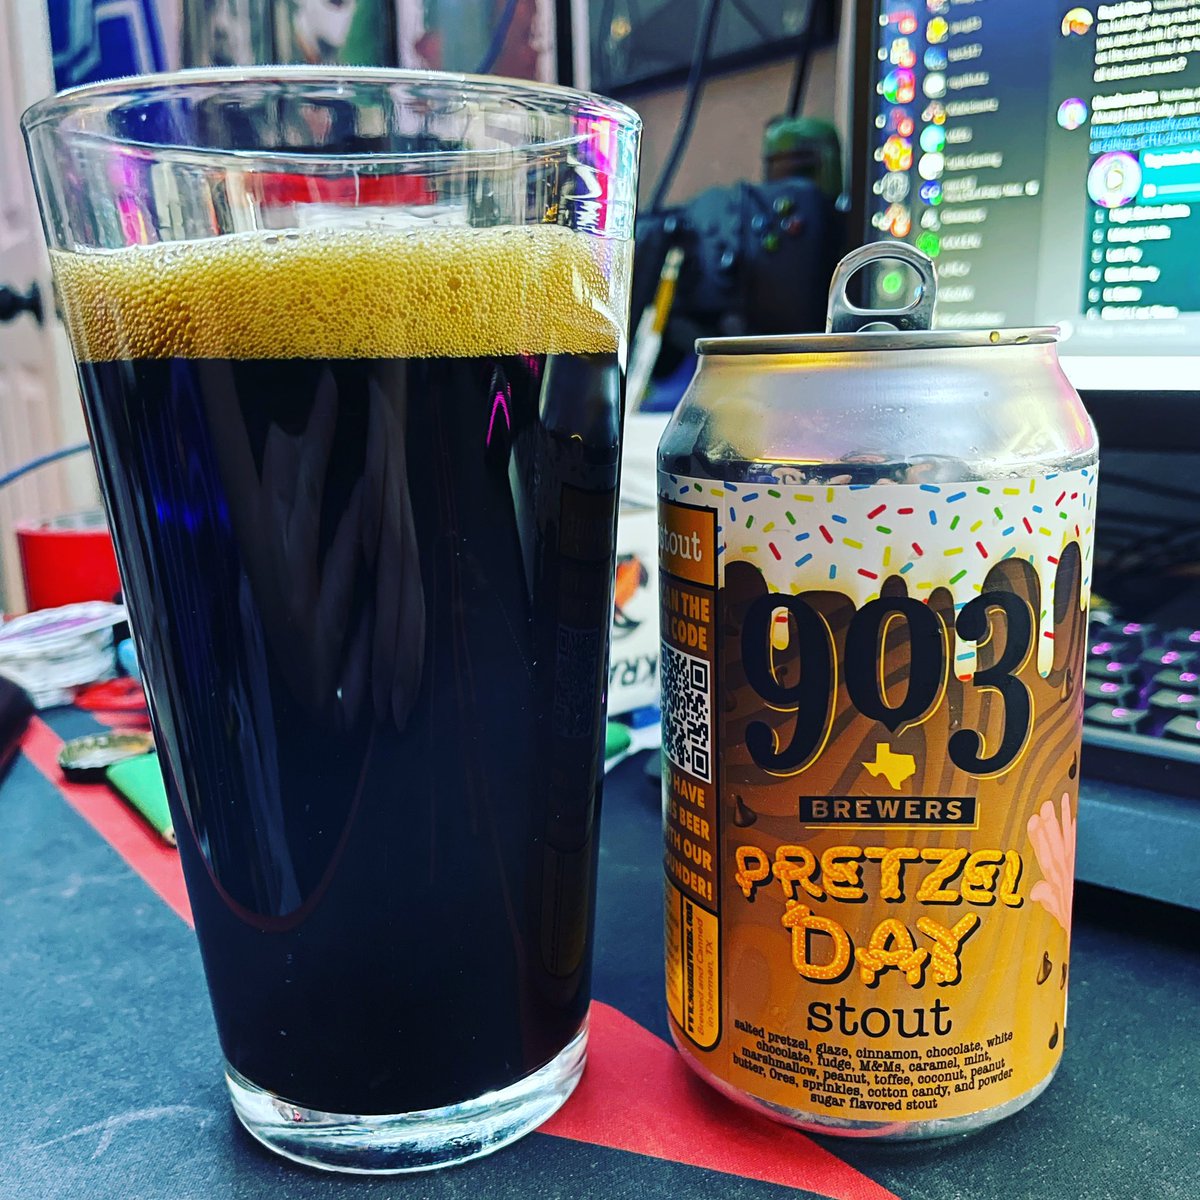 Had a couple @903Brewers Pretzel Day Stouts last night. Video drops shortly. So tasty! 

#beer #craftbeer #stout #pretzelday #theoffice #beerpics #beerpic #strikeoutbeer #craftbeerlife #craftbeerlove #podcast #craftbeerpodcast #beerpodcast #craftbeernerd #cheers #tasty